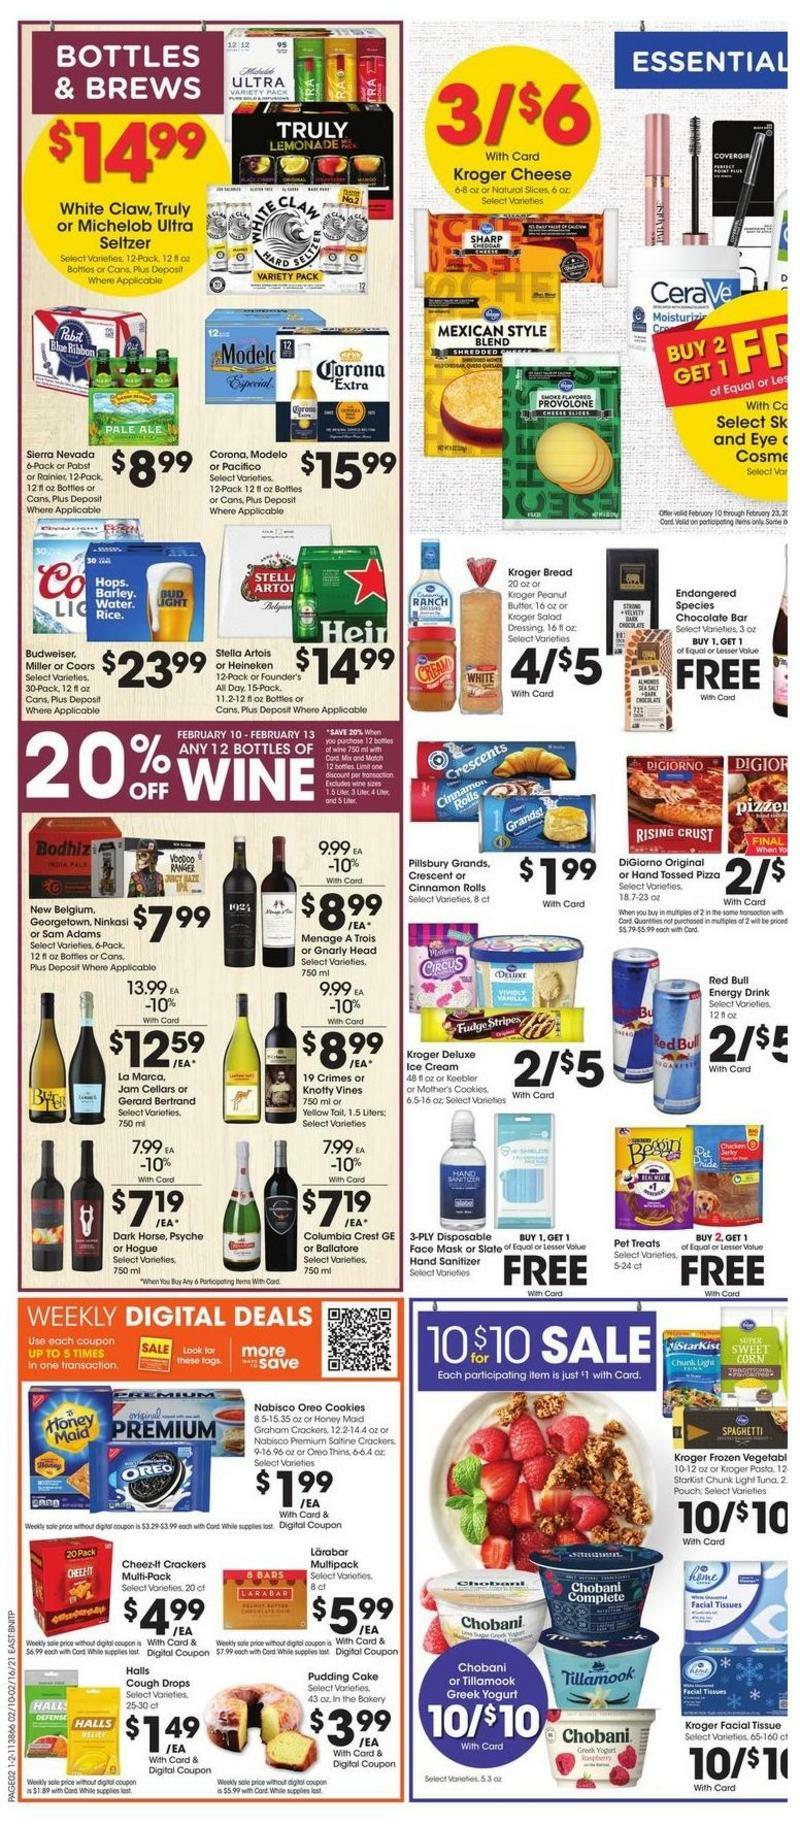 Fred Meyer Weekly Ad from February 10